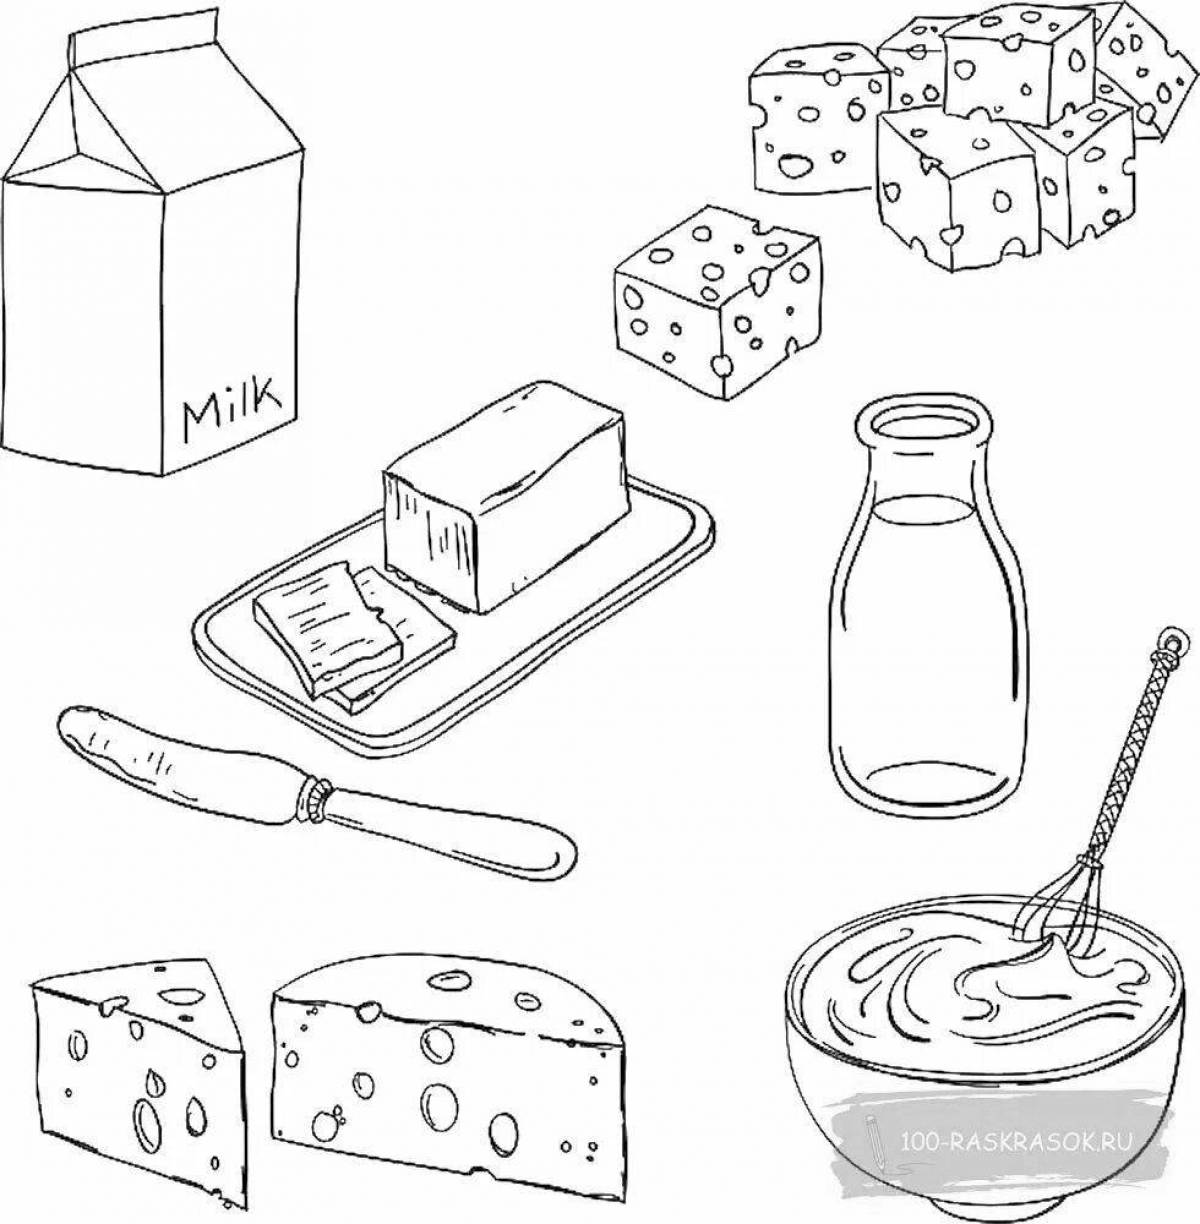 Colorful dairy products coloring pages for kids